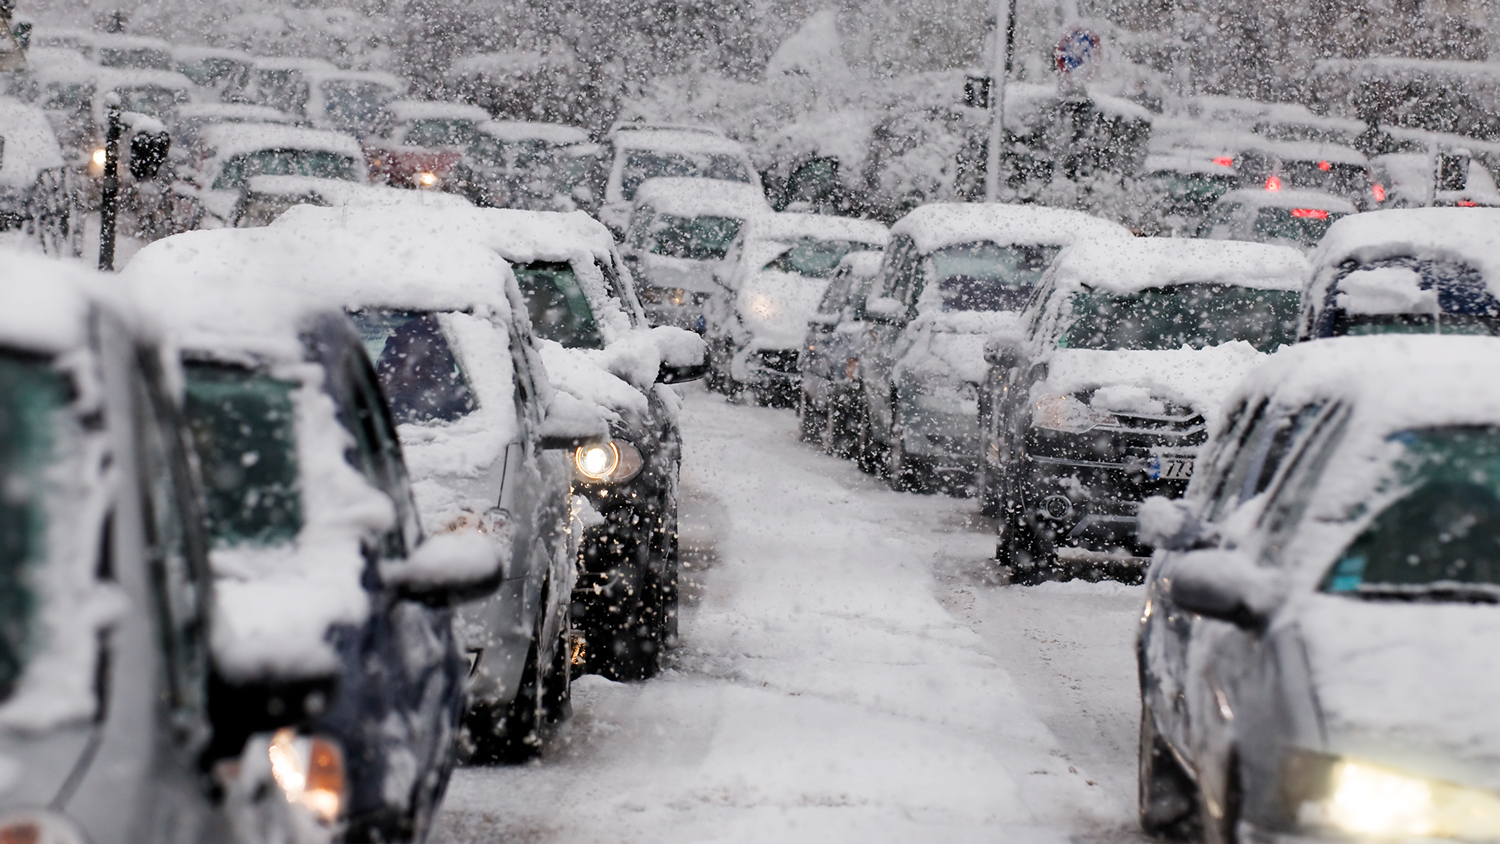 Lines of cars, covered in snow, wait on snow-covered roads.